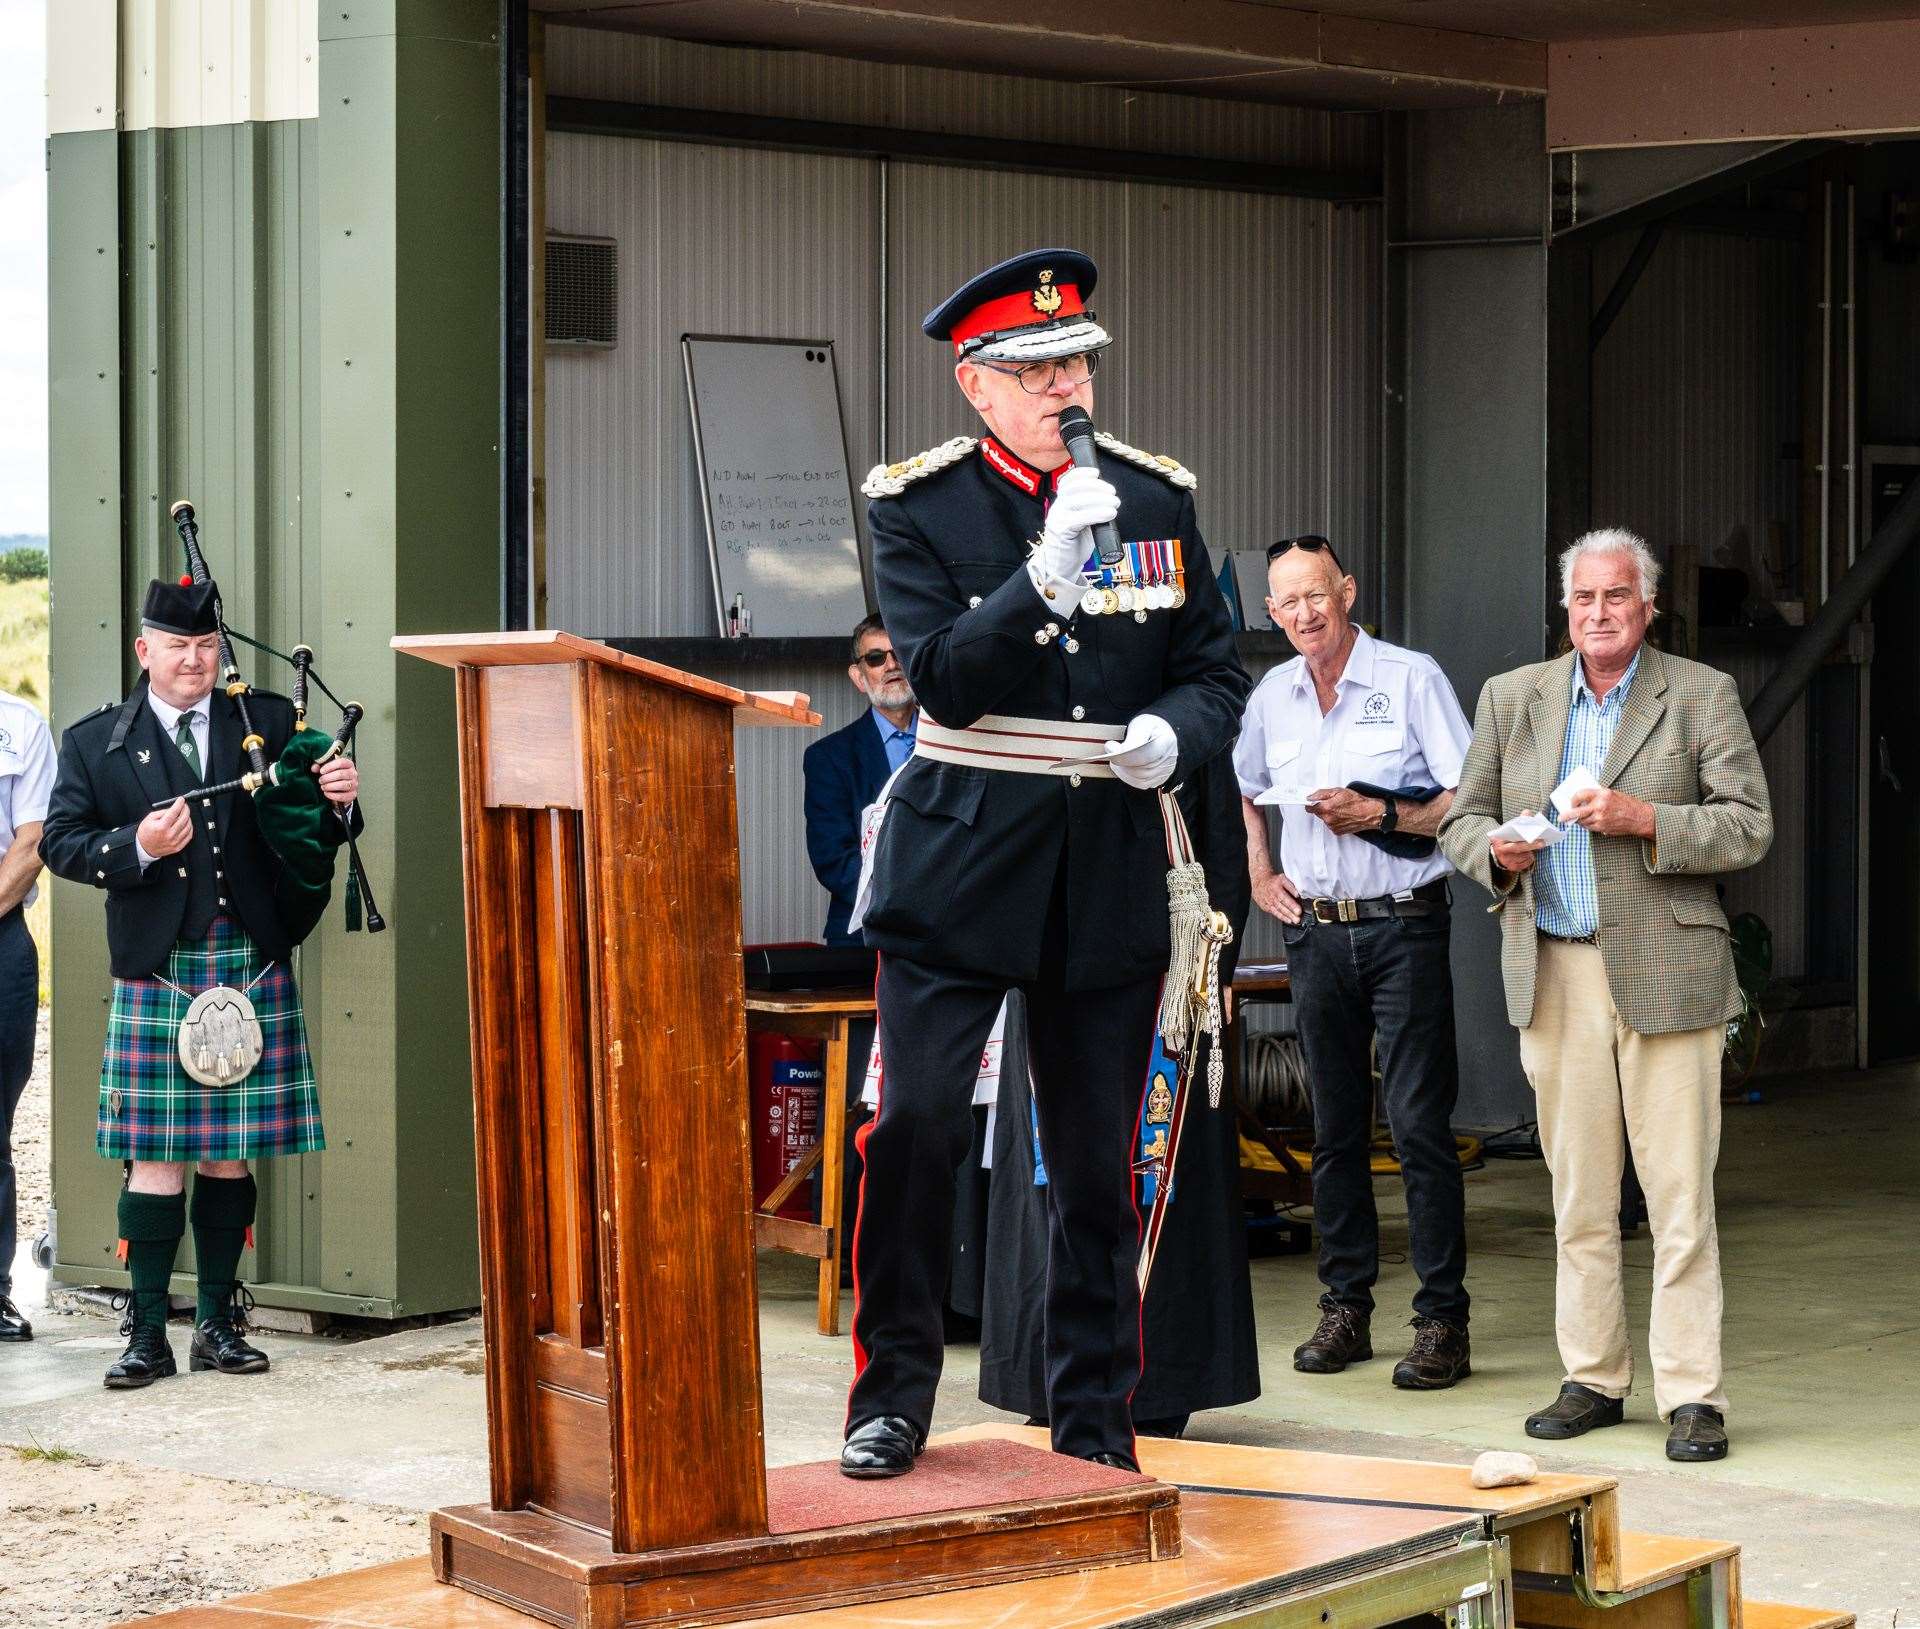 In his address Lord-Lieutenant Patrick Marriott made a plea for continuing support for East Sutherland Rescue Association (ESRA). Picture Andy Kirby.